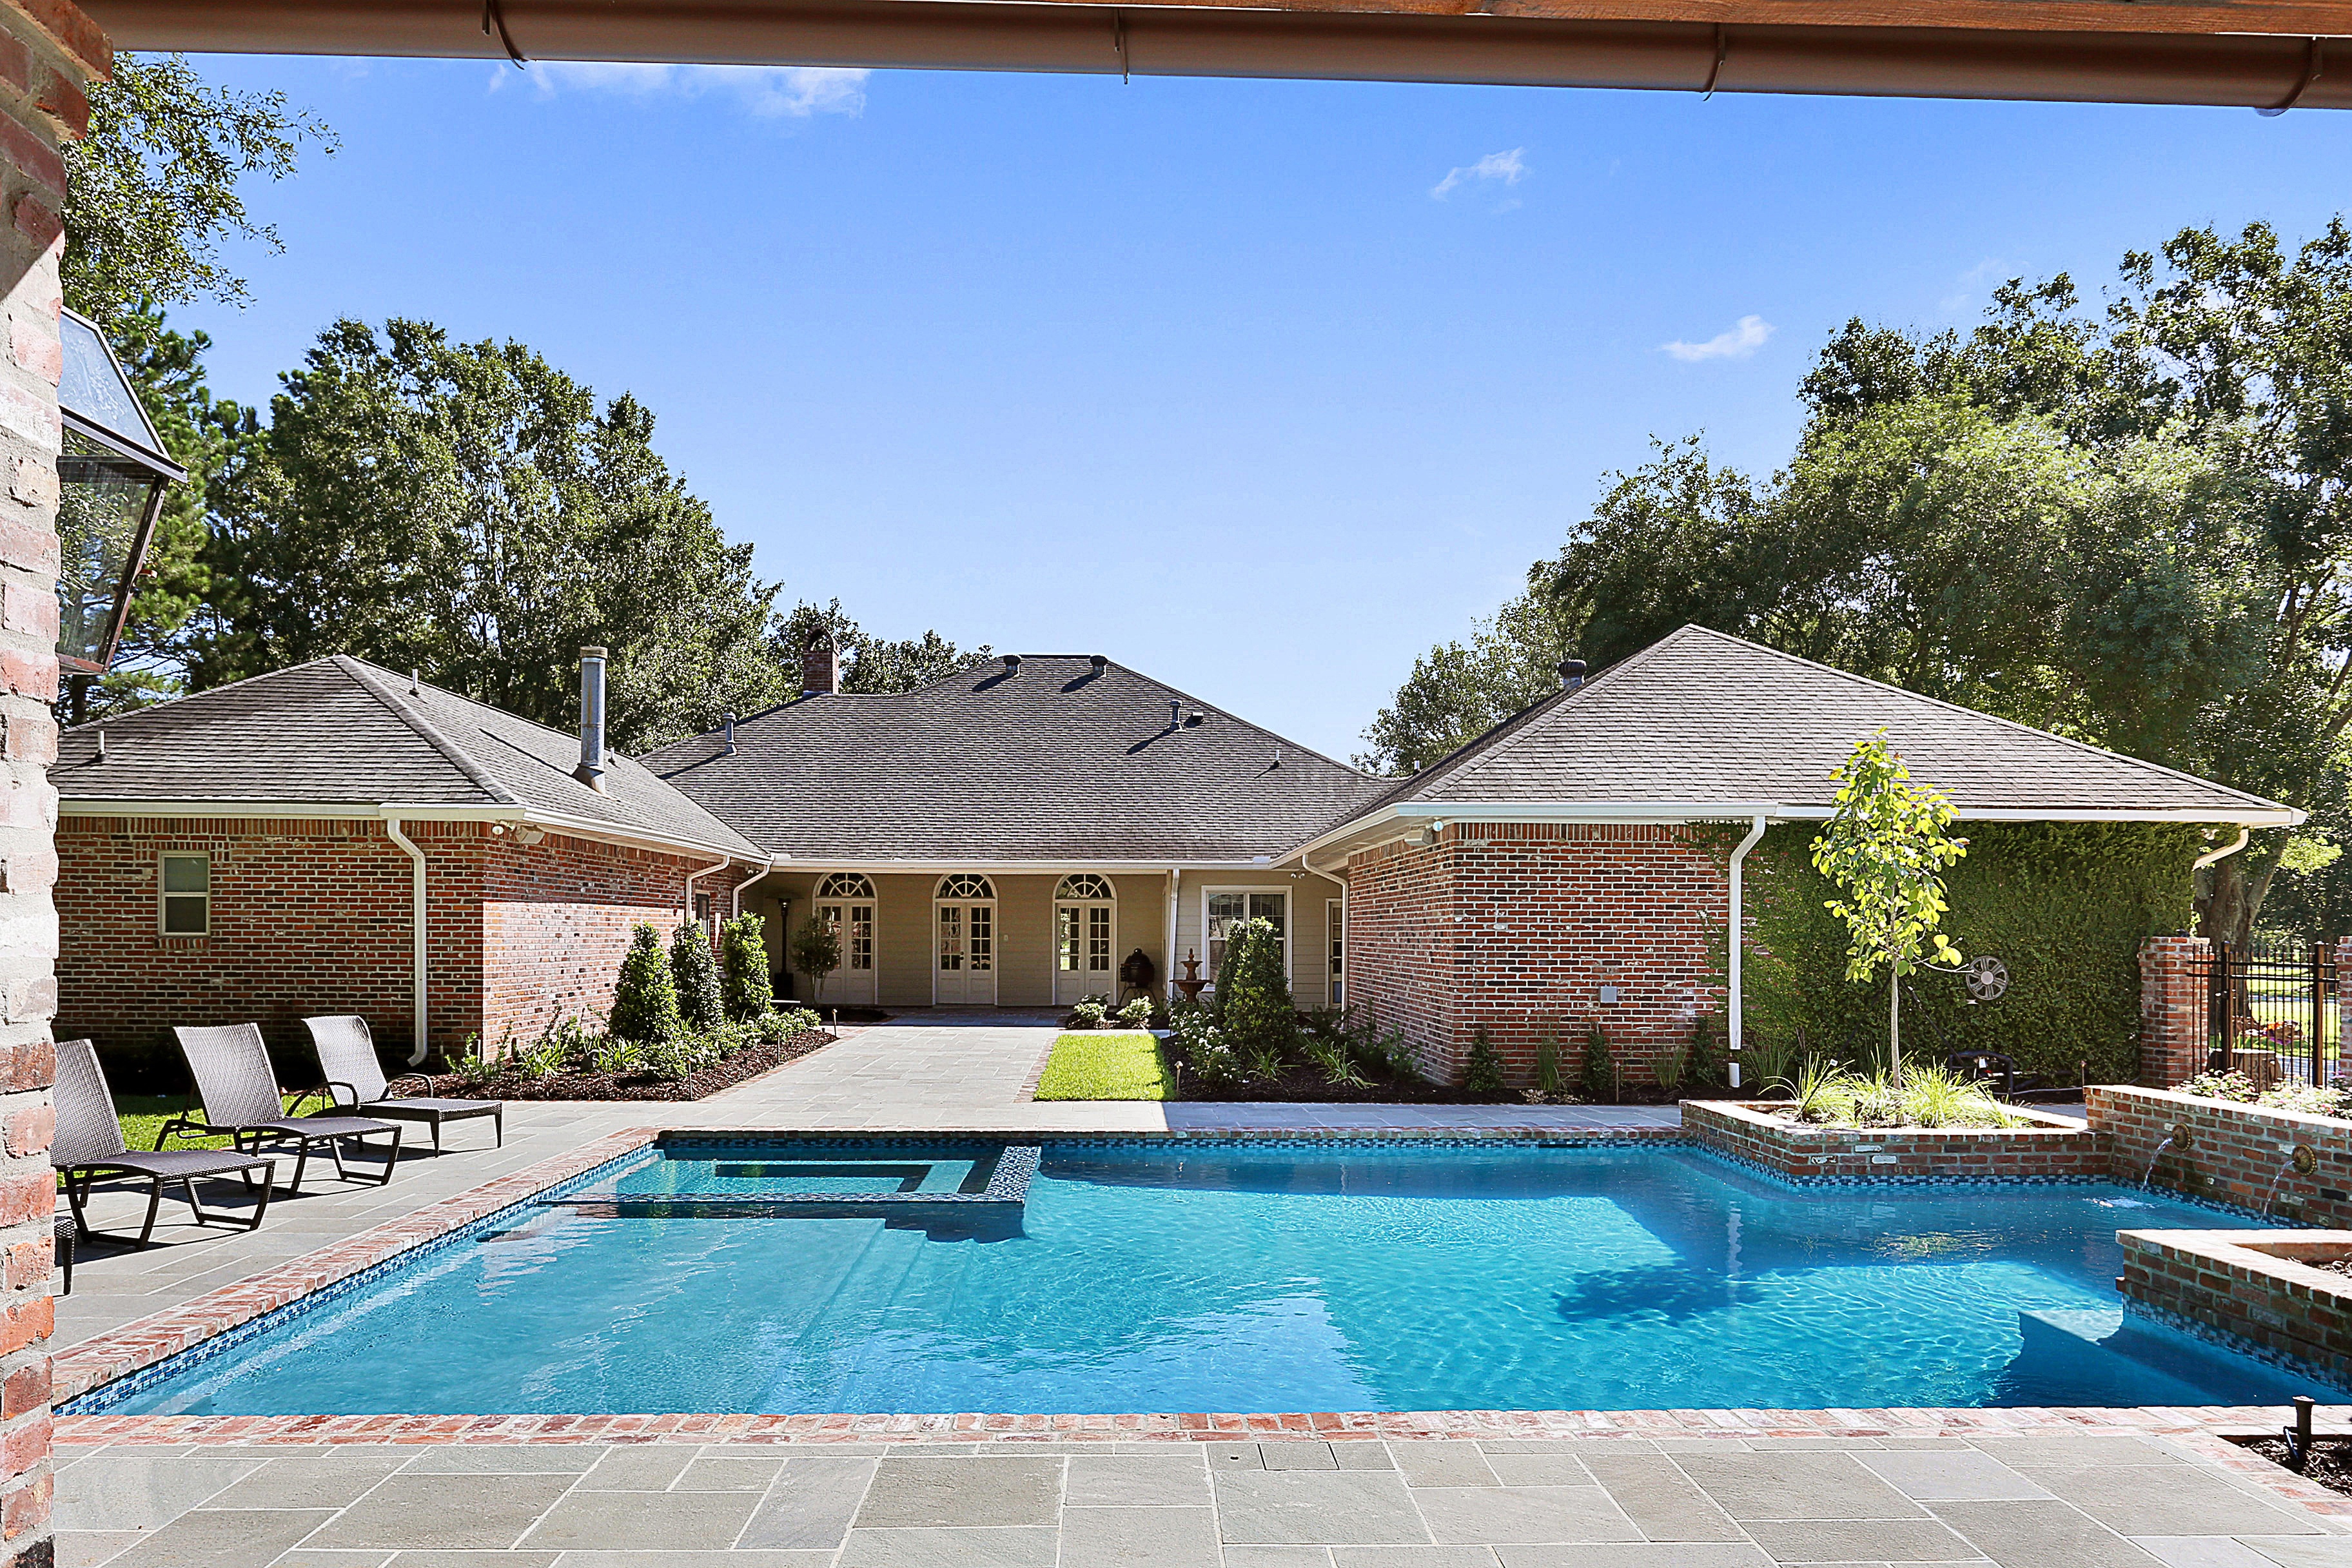 Pool with Tanning Ledge Baton Rouge | Pool with water features Baton ...